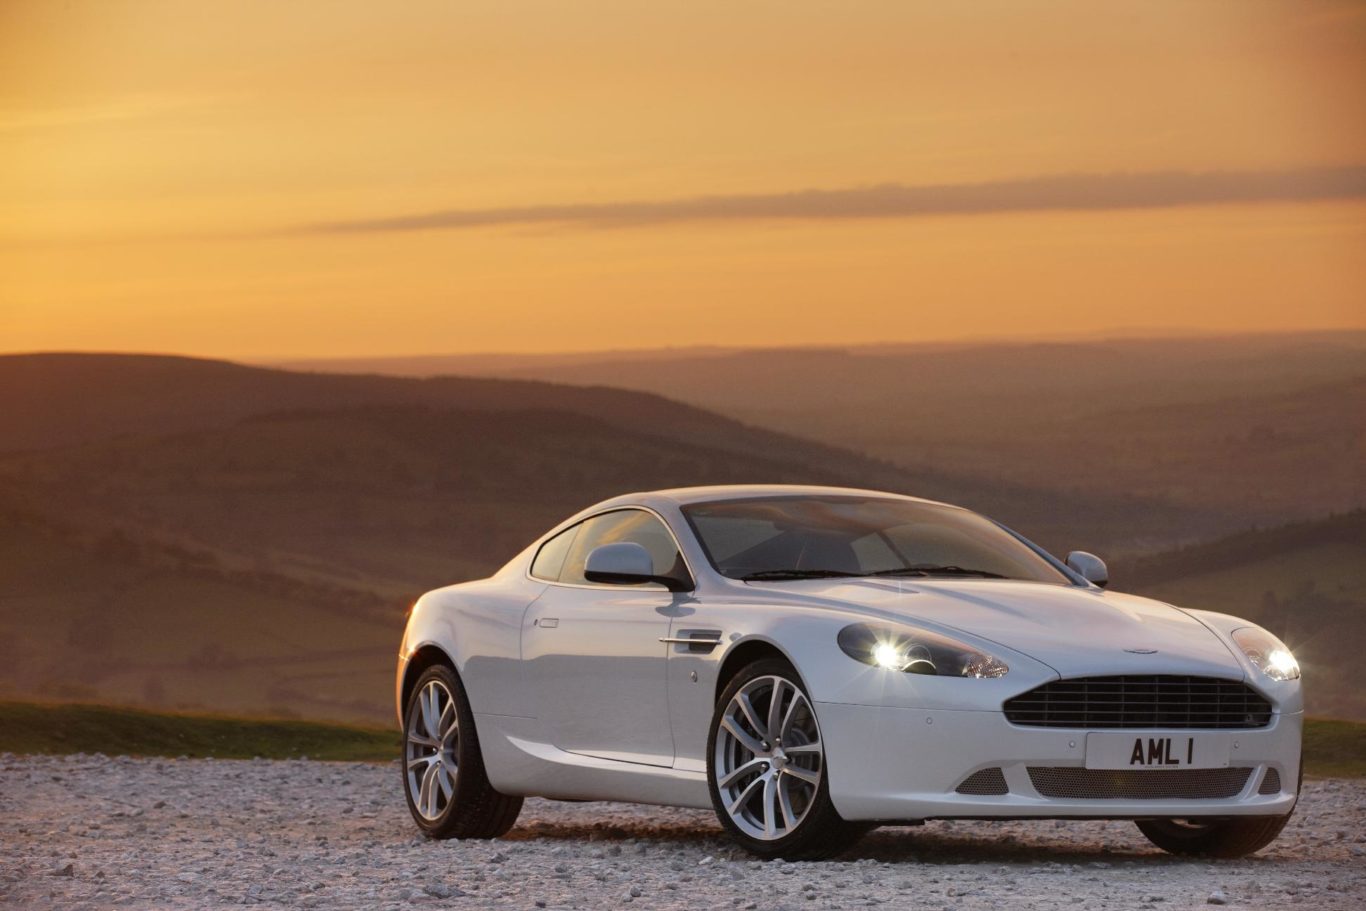 The DB9 heralded a new age for Aston Martin